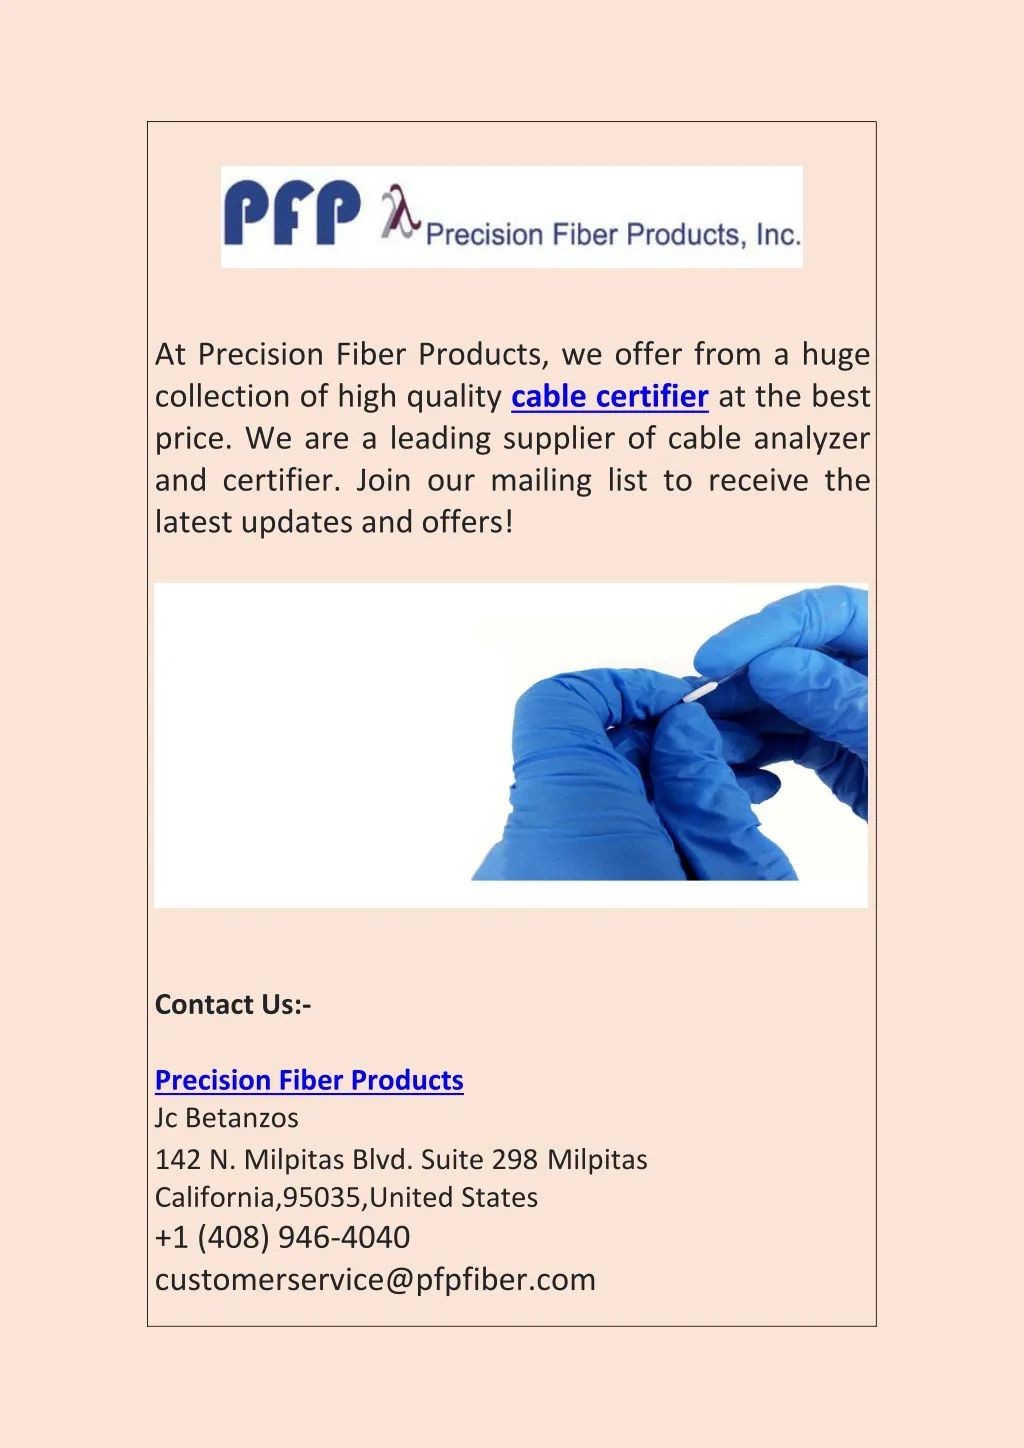 at precision fiber products we offer from a huge